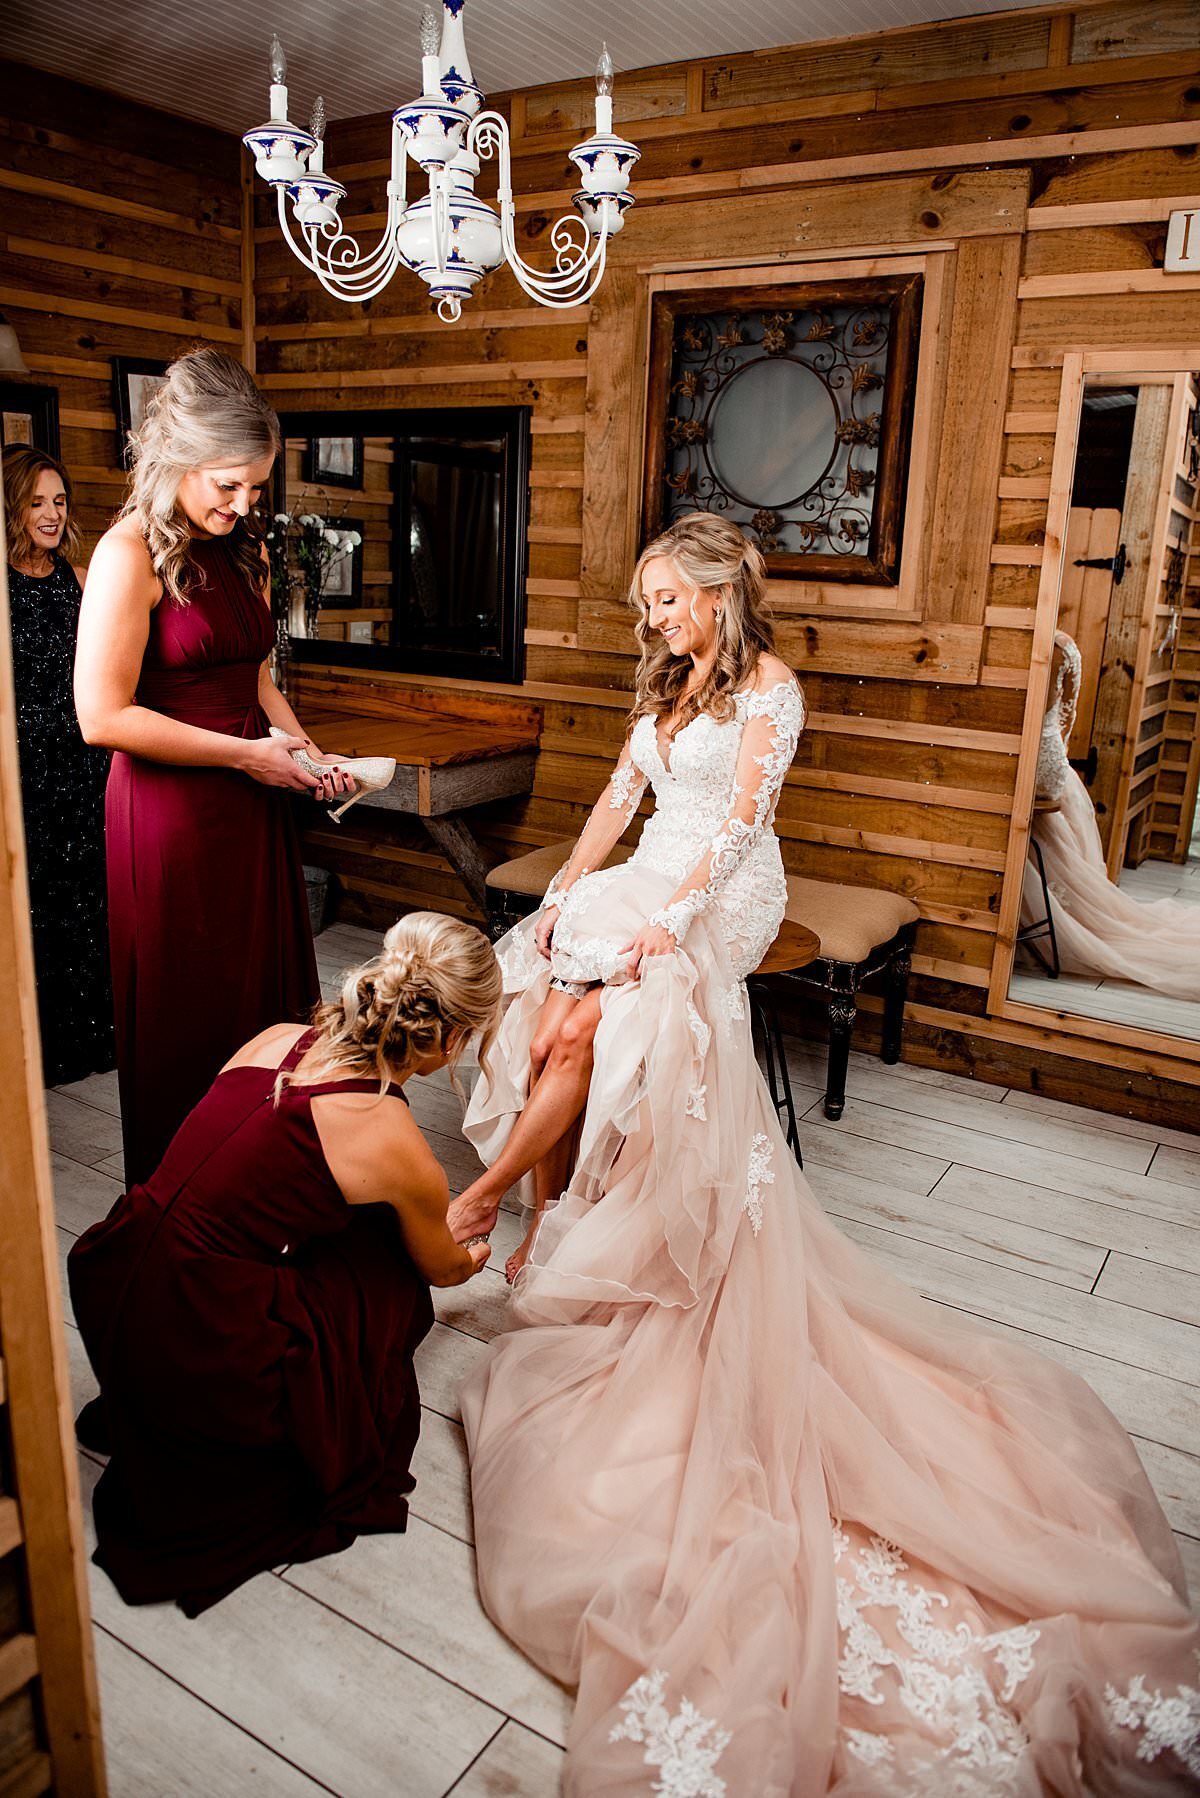 Bridesmaids helping bride put her garter on, wood getting ready room with white chandelier